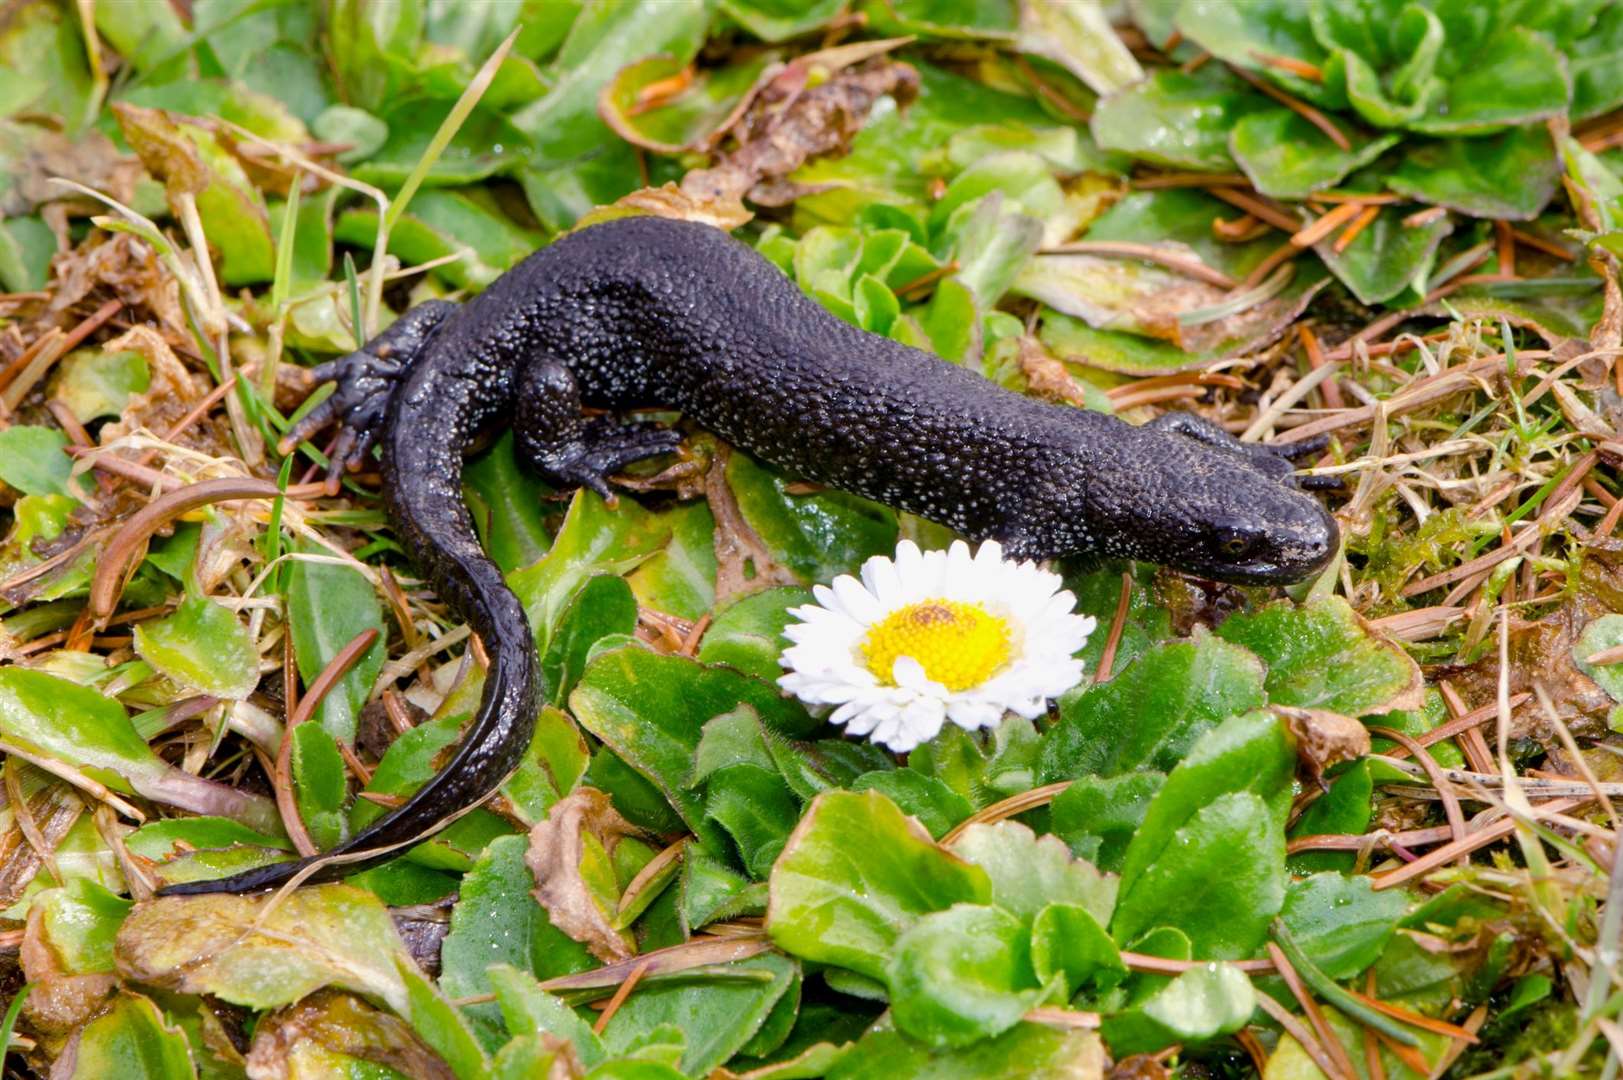 Great Crested Newts are a protected species